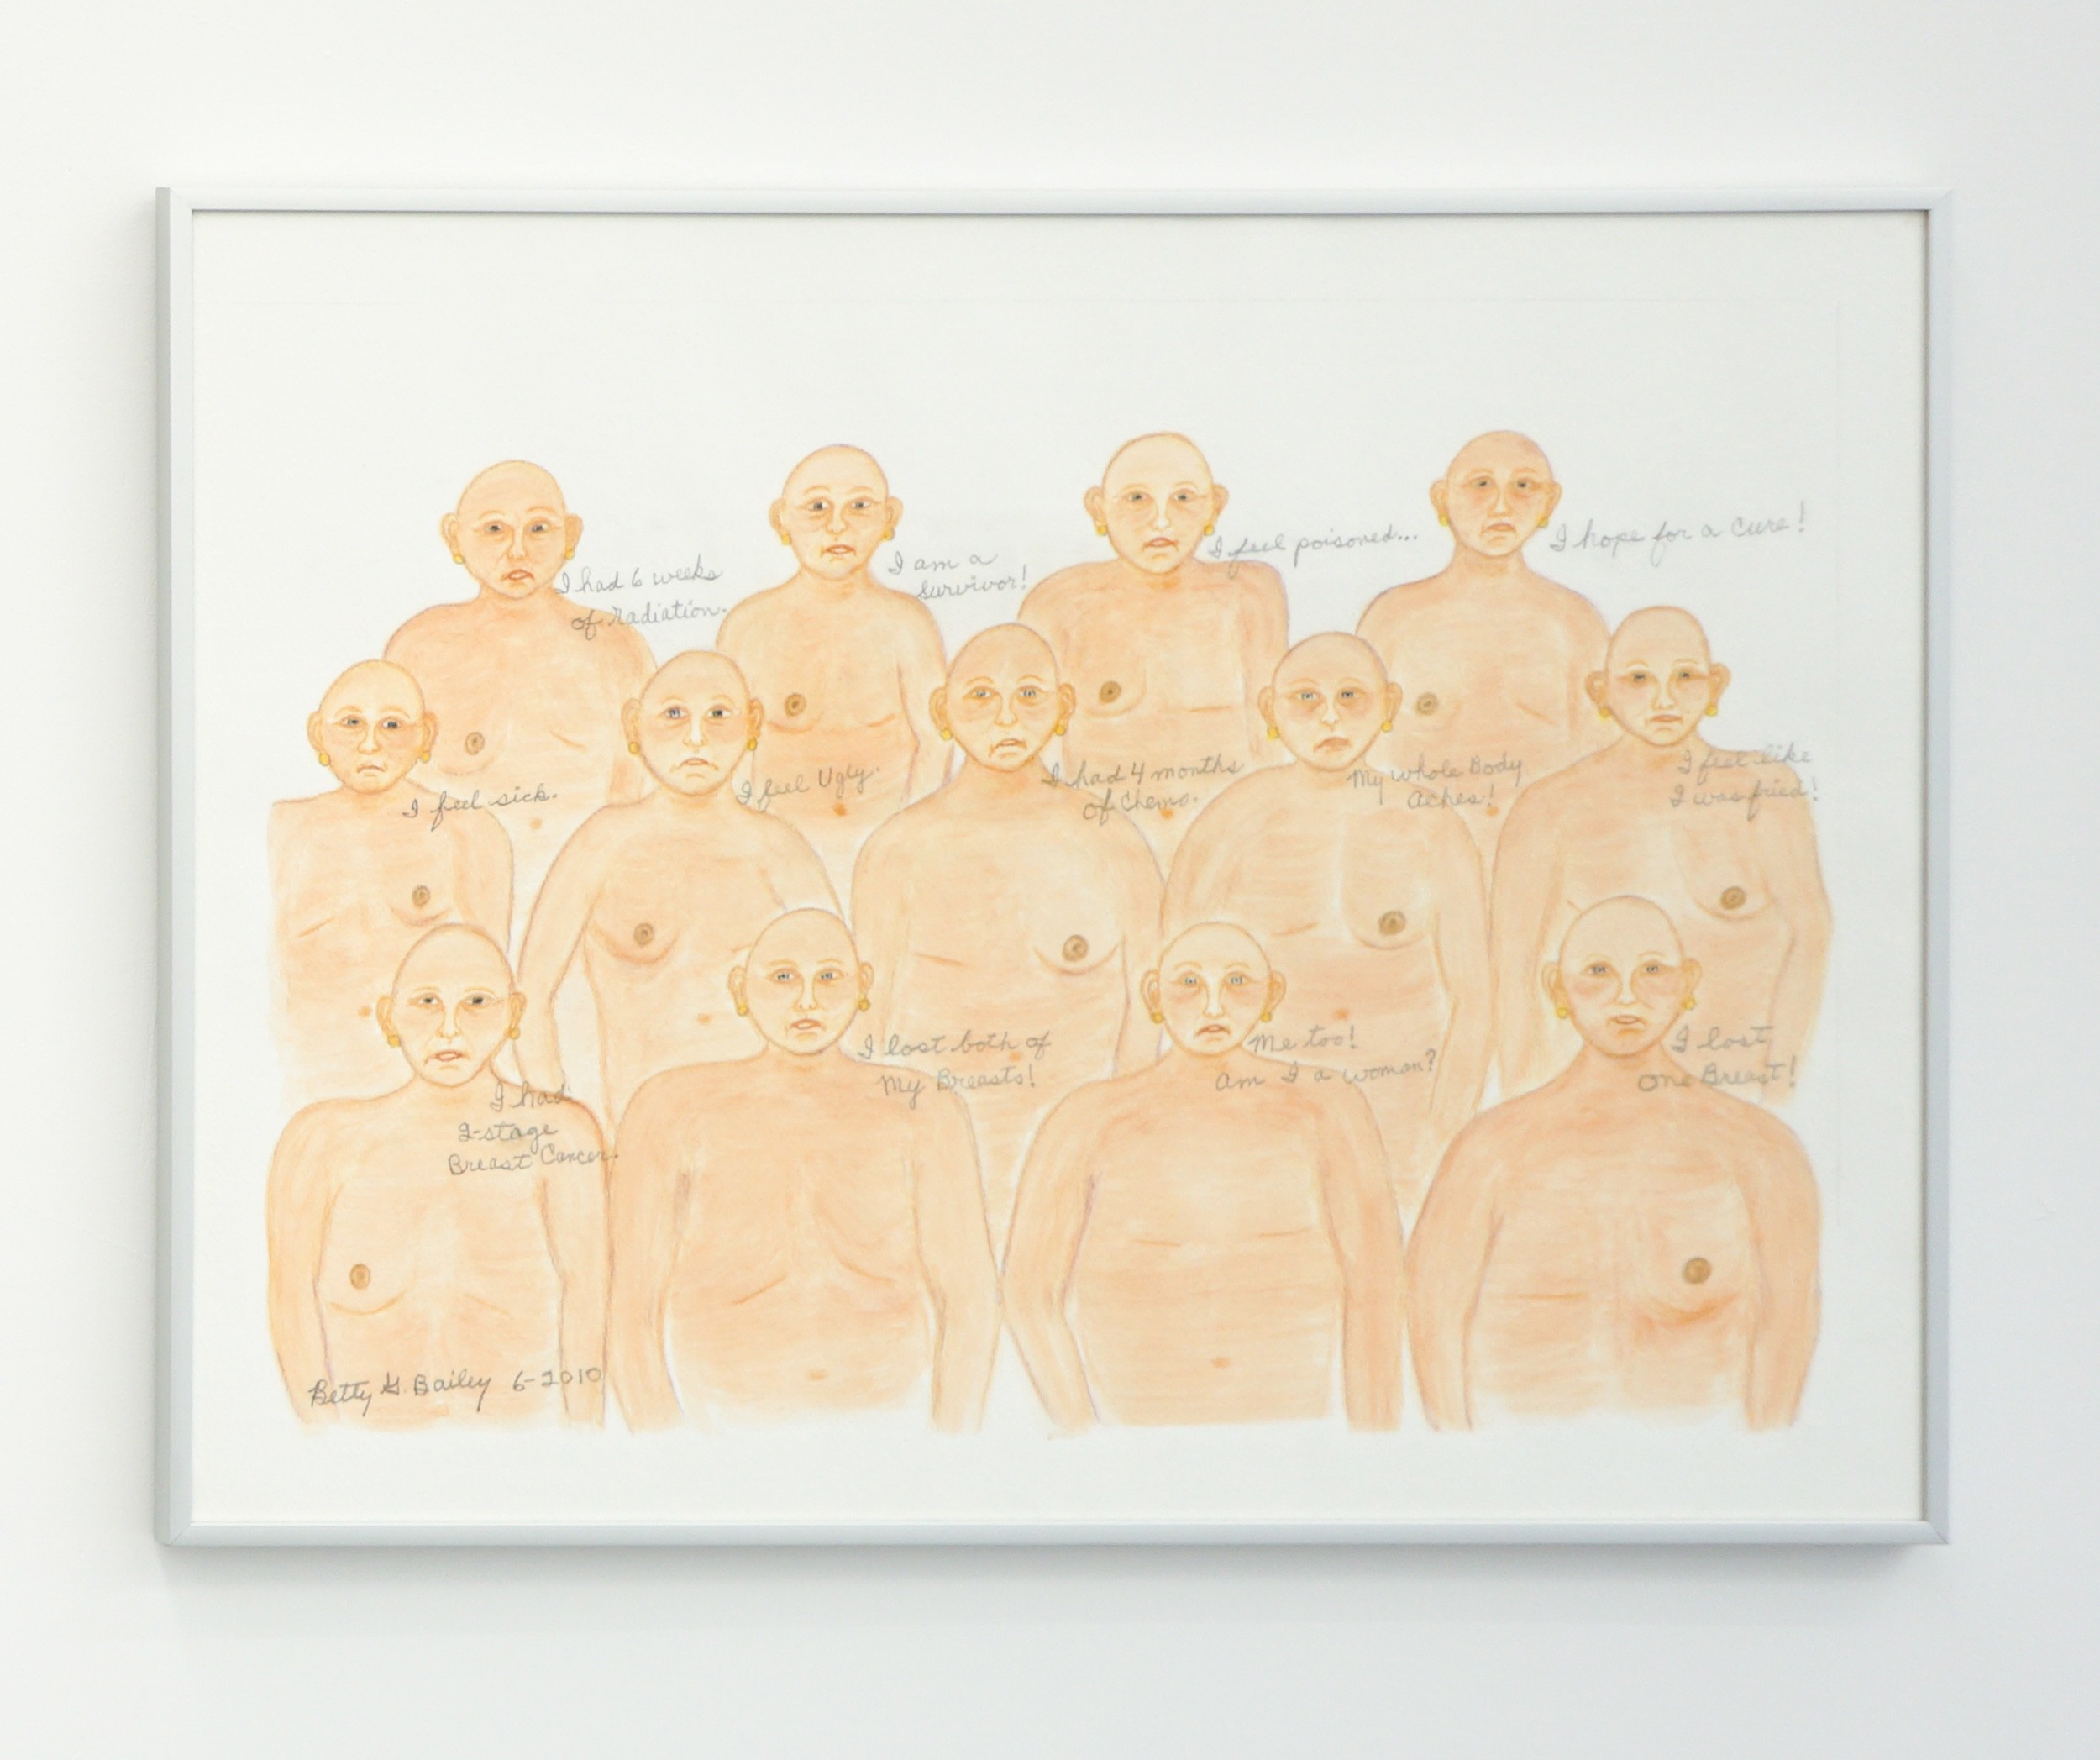  Betty Bailey  Breast Cancer Survivors , 2010 Colored pencil and gouache on paper 18 x 24 inches 